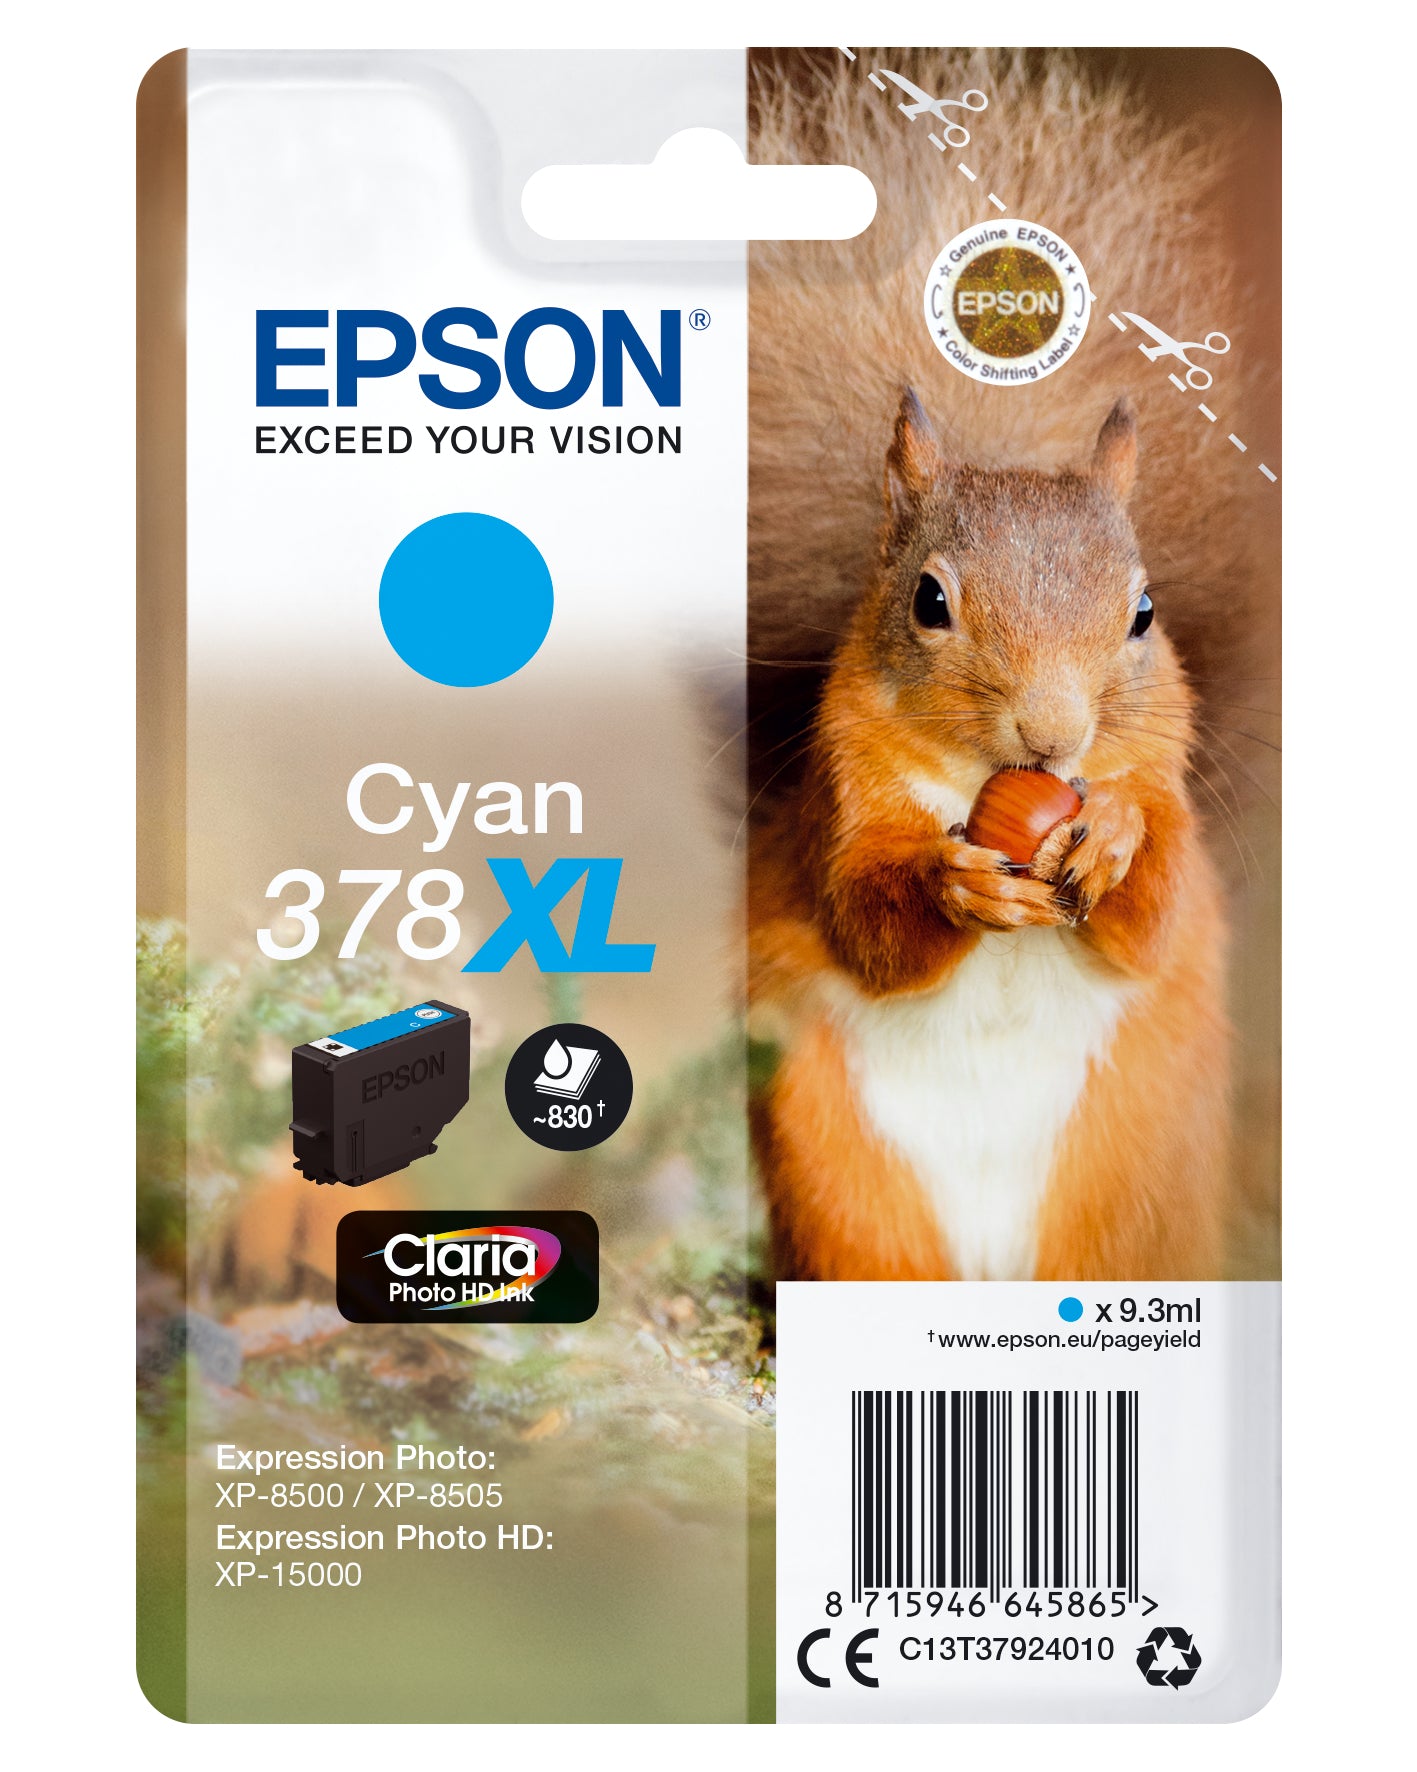 Epson C13T37924010/378XL Ink cartridge cyan high-capacity, 830 pages 9,3ml for Epson XP 15000/8000